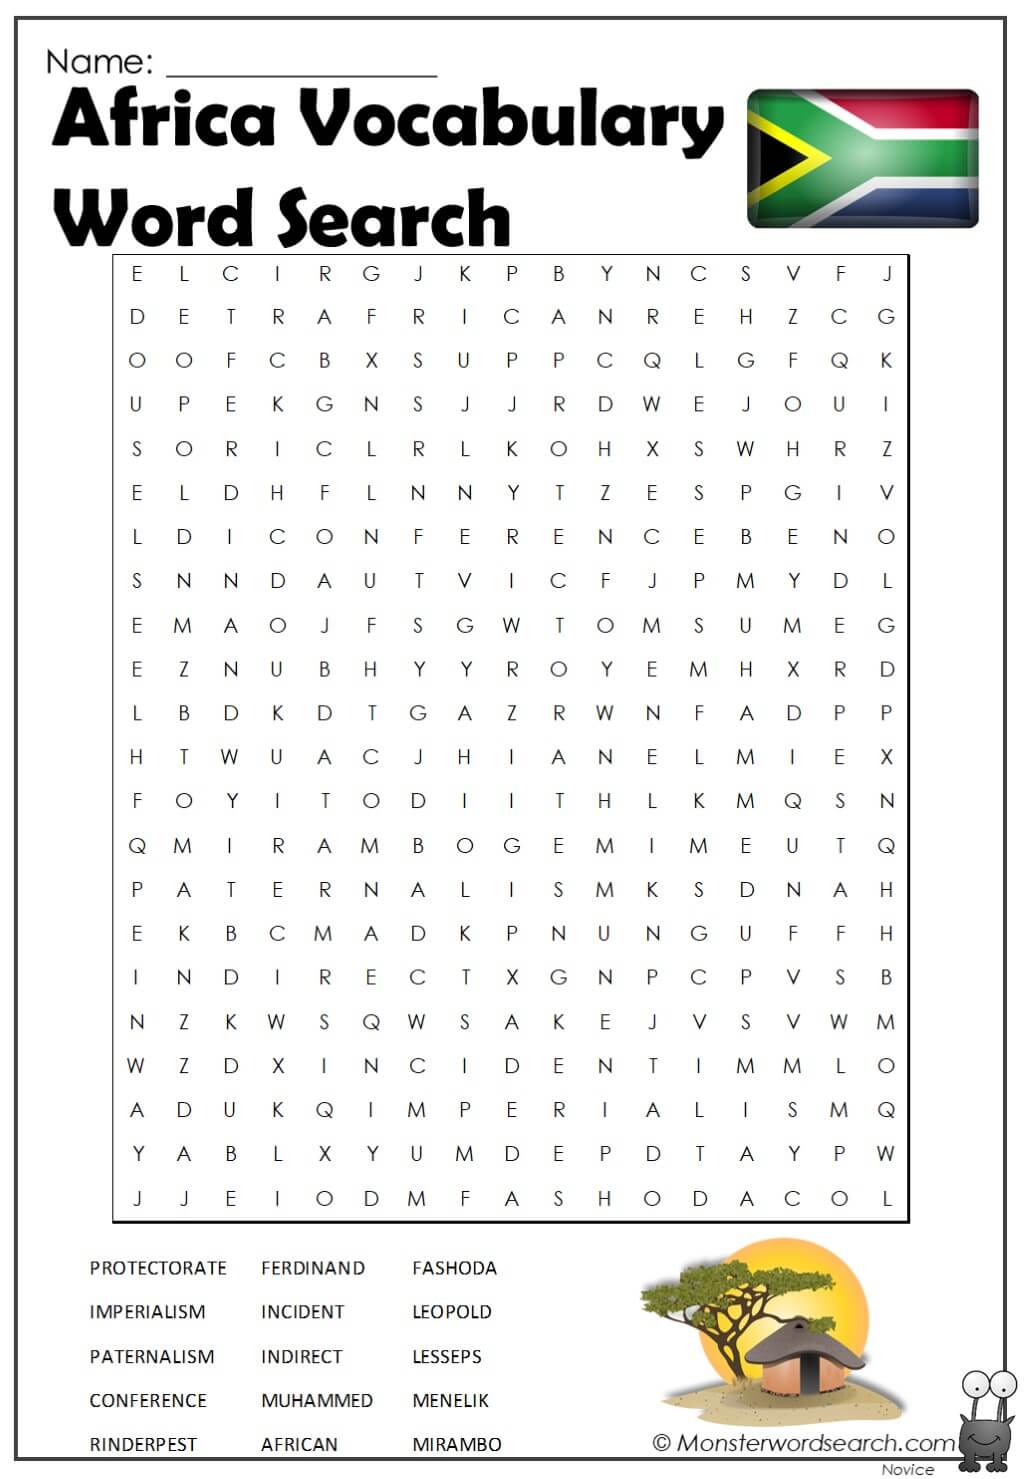 Africa Vocabulary Word Search